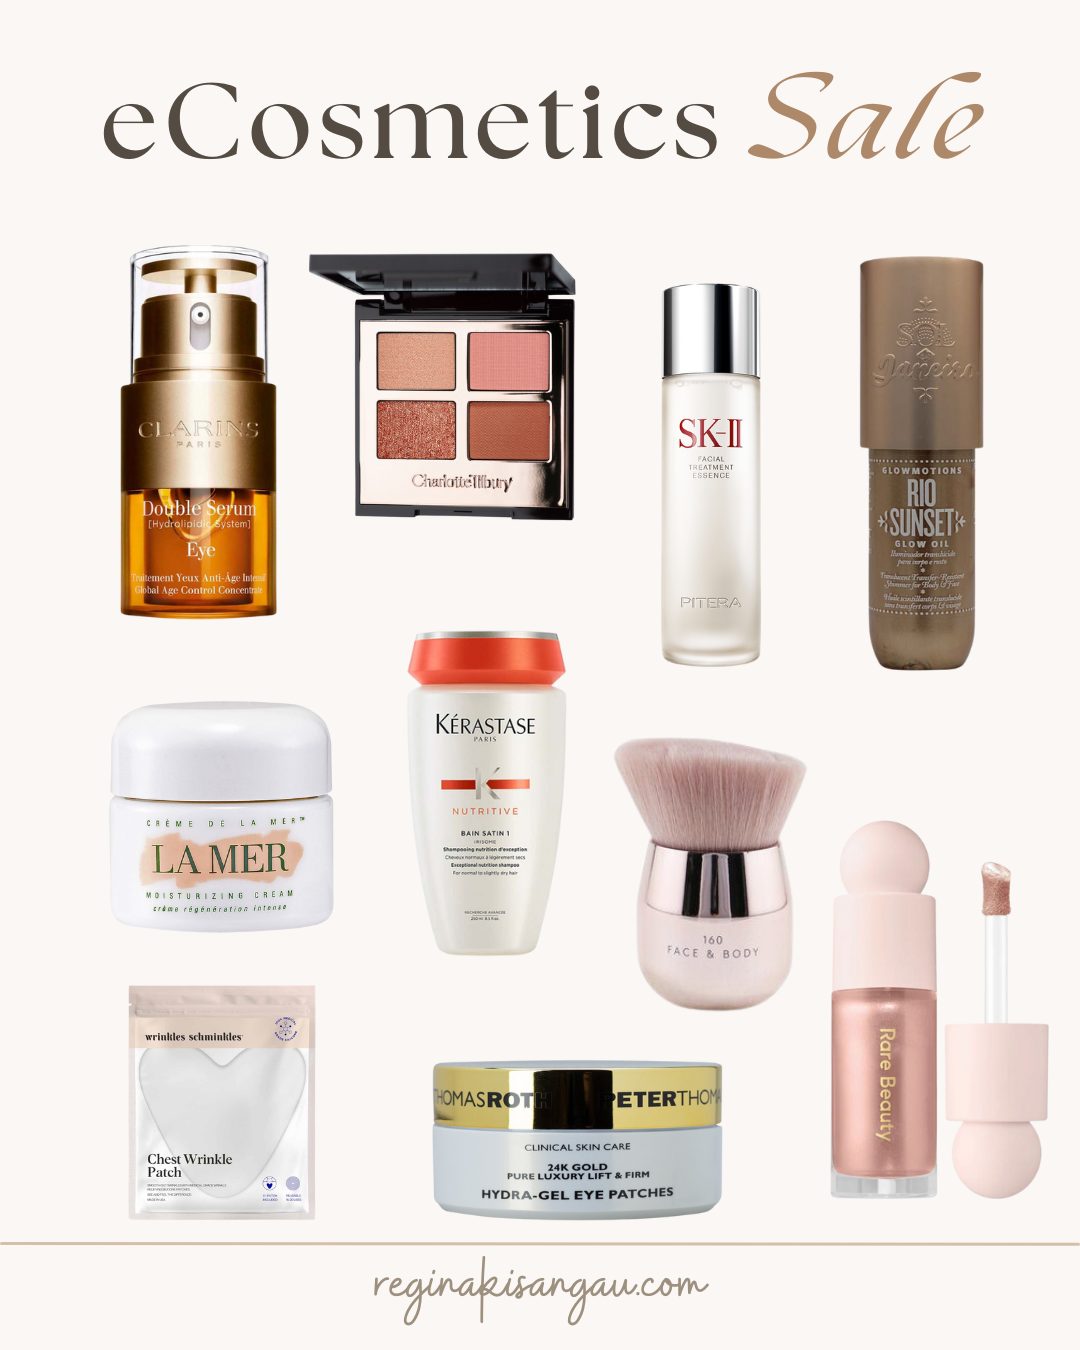 Glam for Less: Get 25% Off Everything at eCosmetics Now!